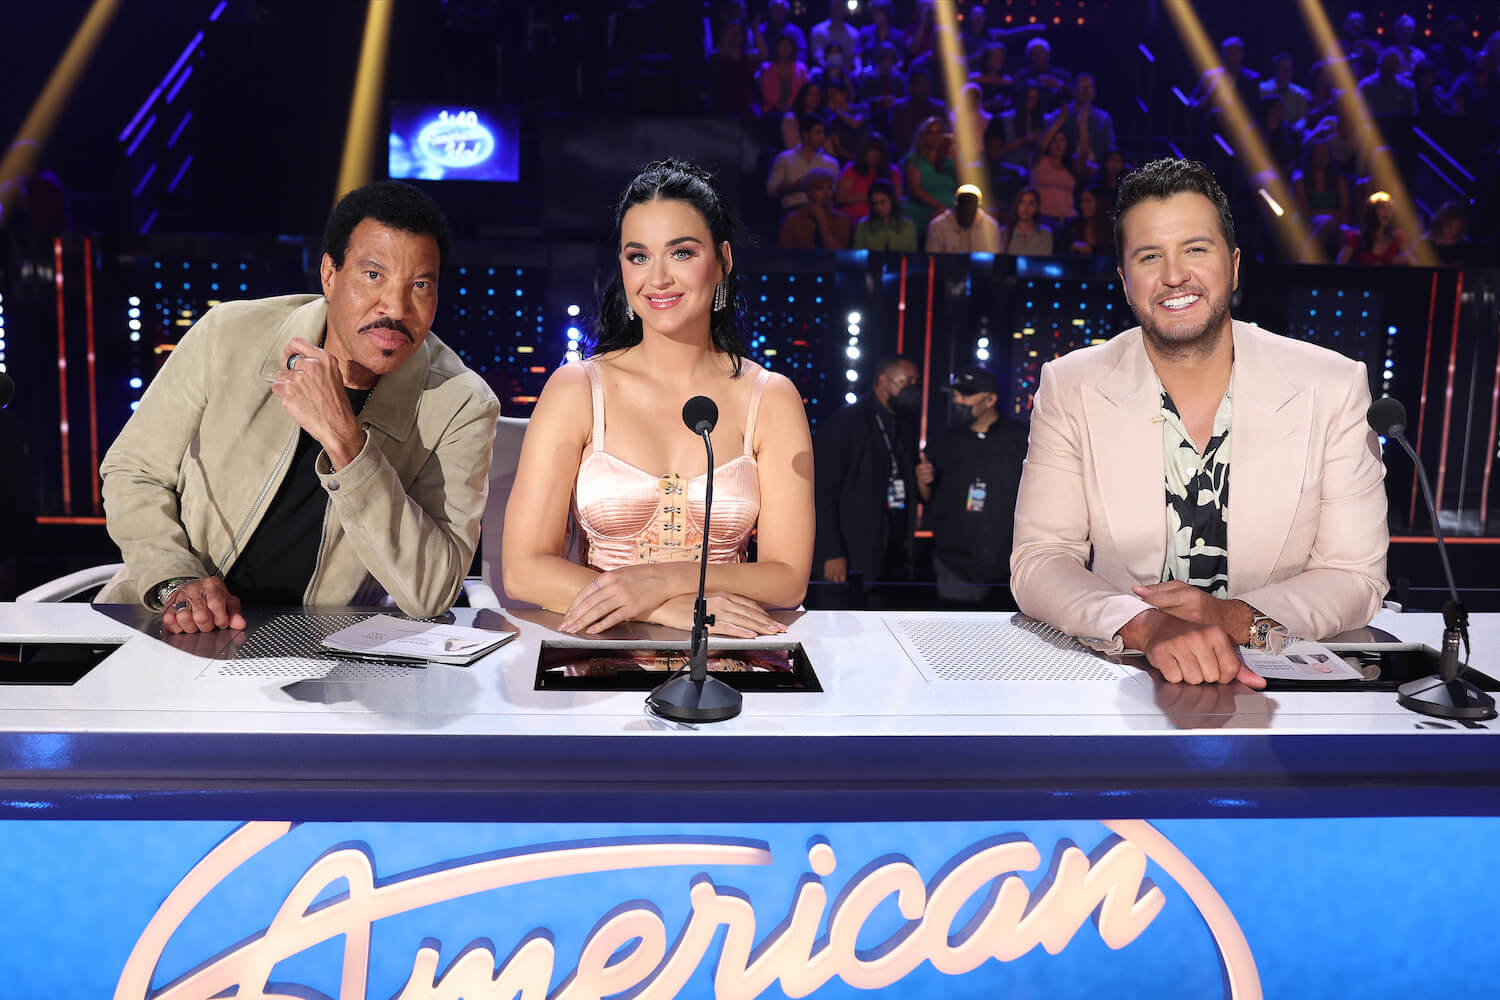 Lionel Richie, Katy Perry, and Luke Bryan on 'American Idol' sitting behind the judges' table